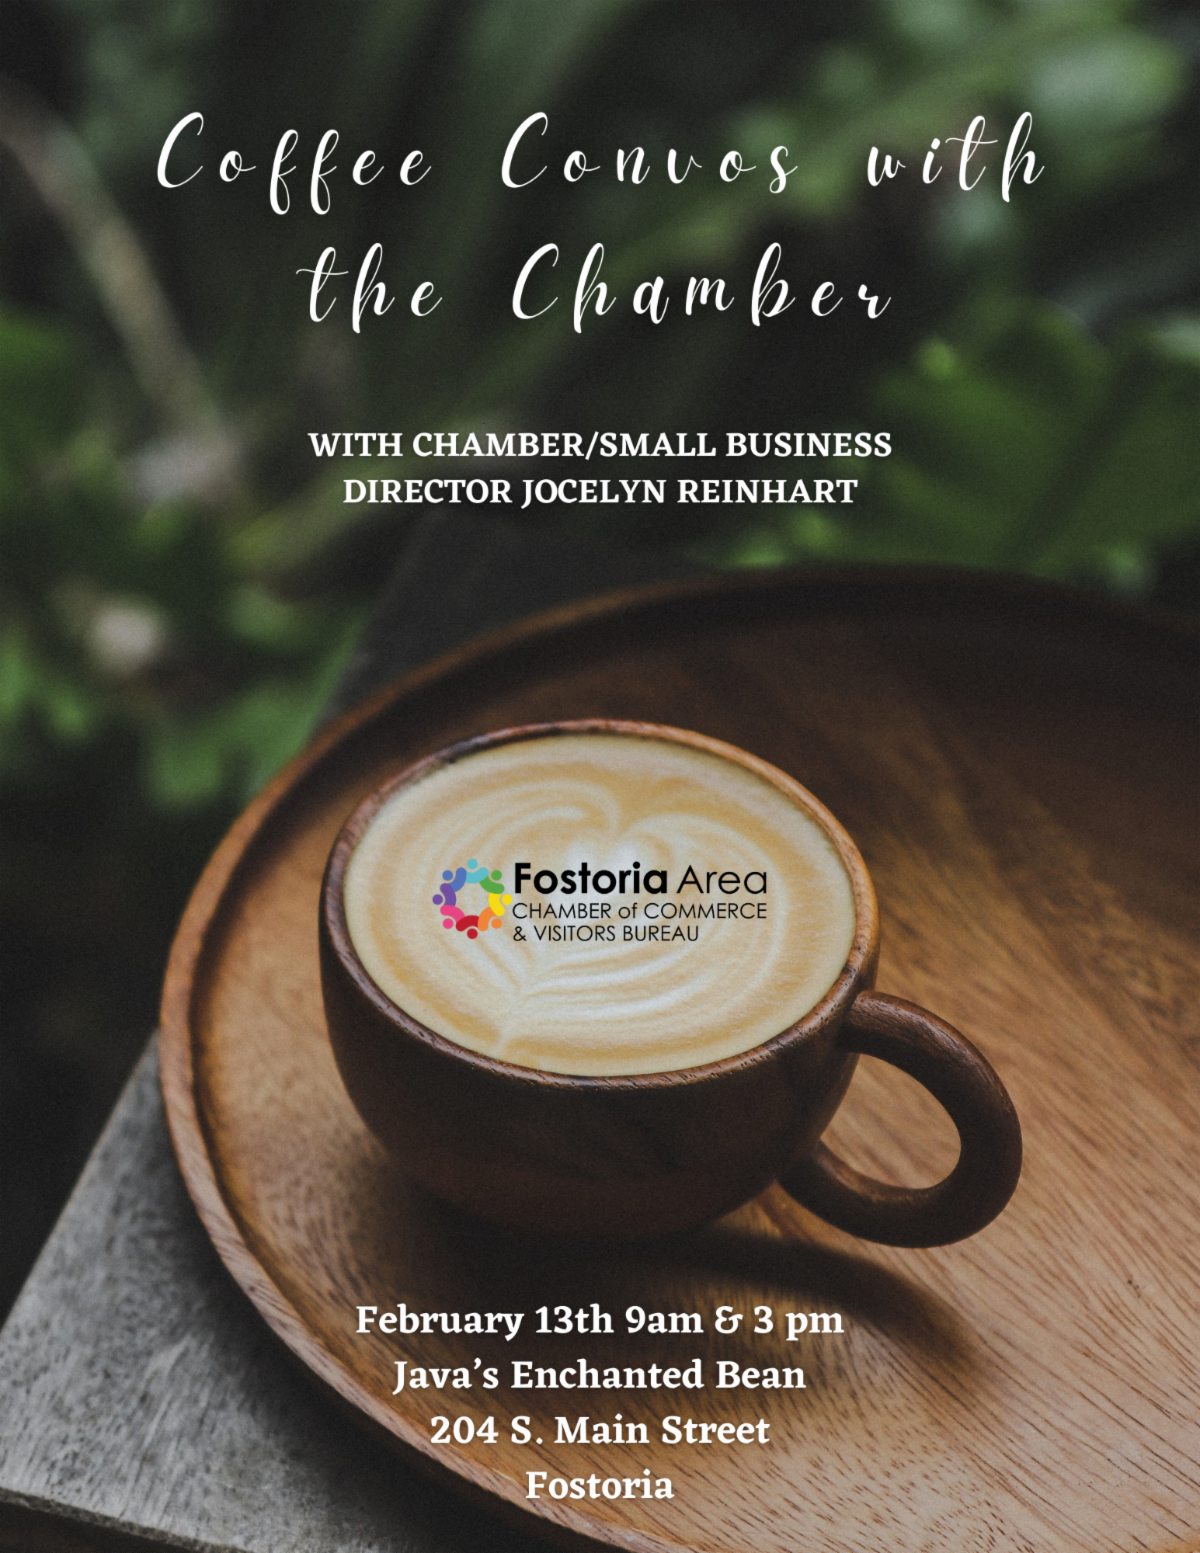 Coffee Convos with the Chamber